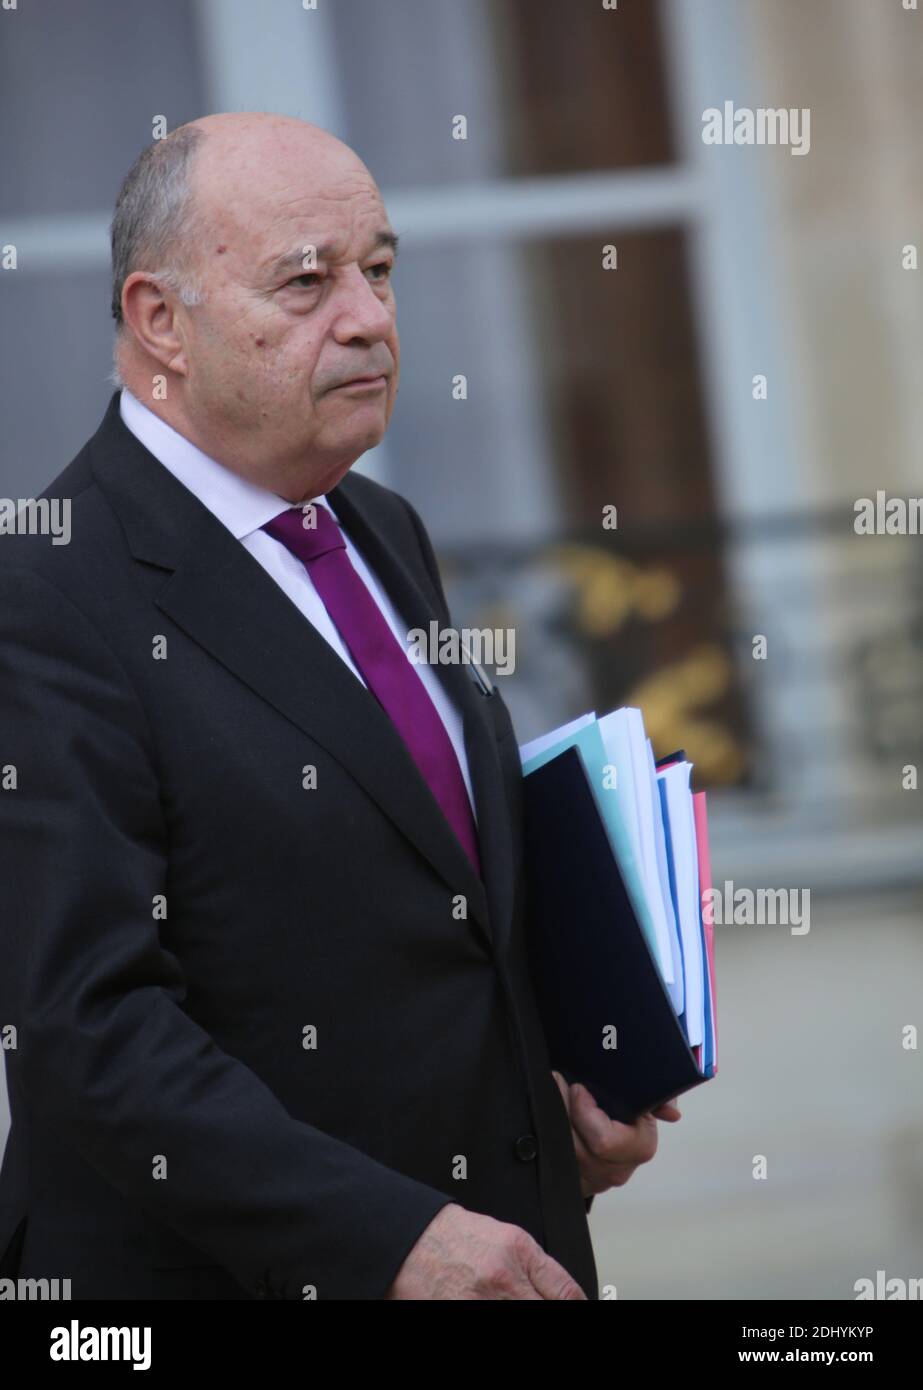 Minister of Town and Regional Development, Rural Affairs and Local  Authorities Jean-Michel Baylet leaving the Elysee Palace following the  weekly cabinet meeting, in Paris, France on April 13, 2016. Photo by  Somer/ABACAPRESS.COM